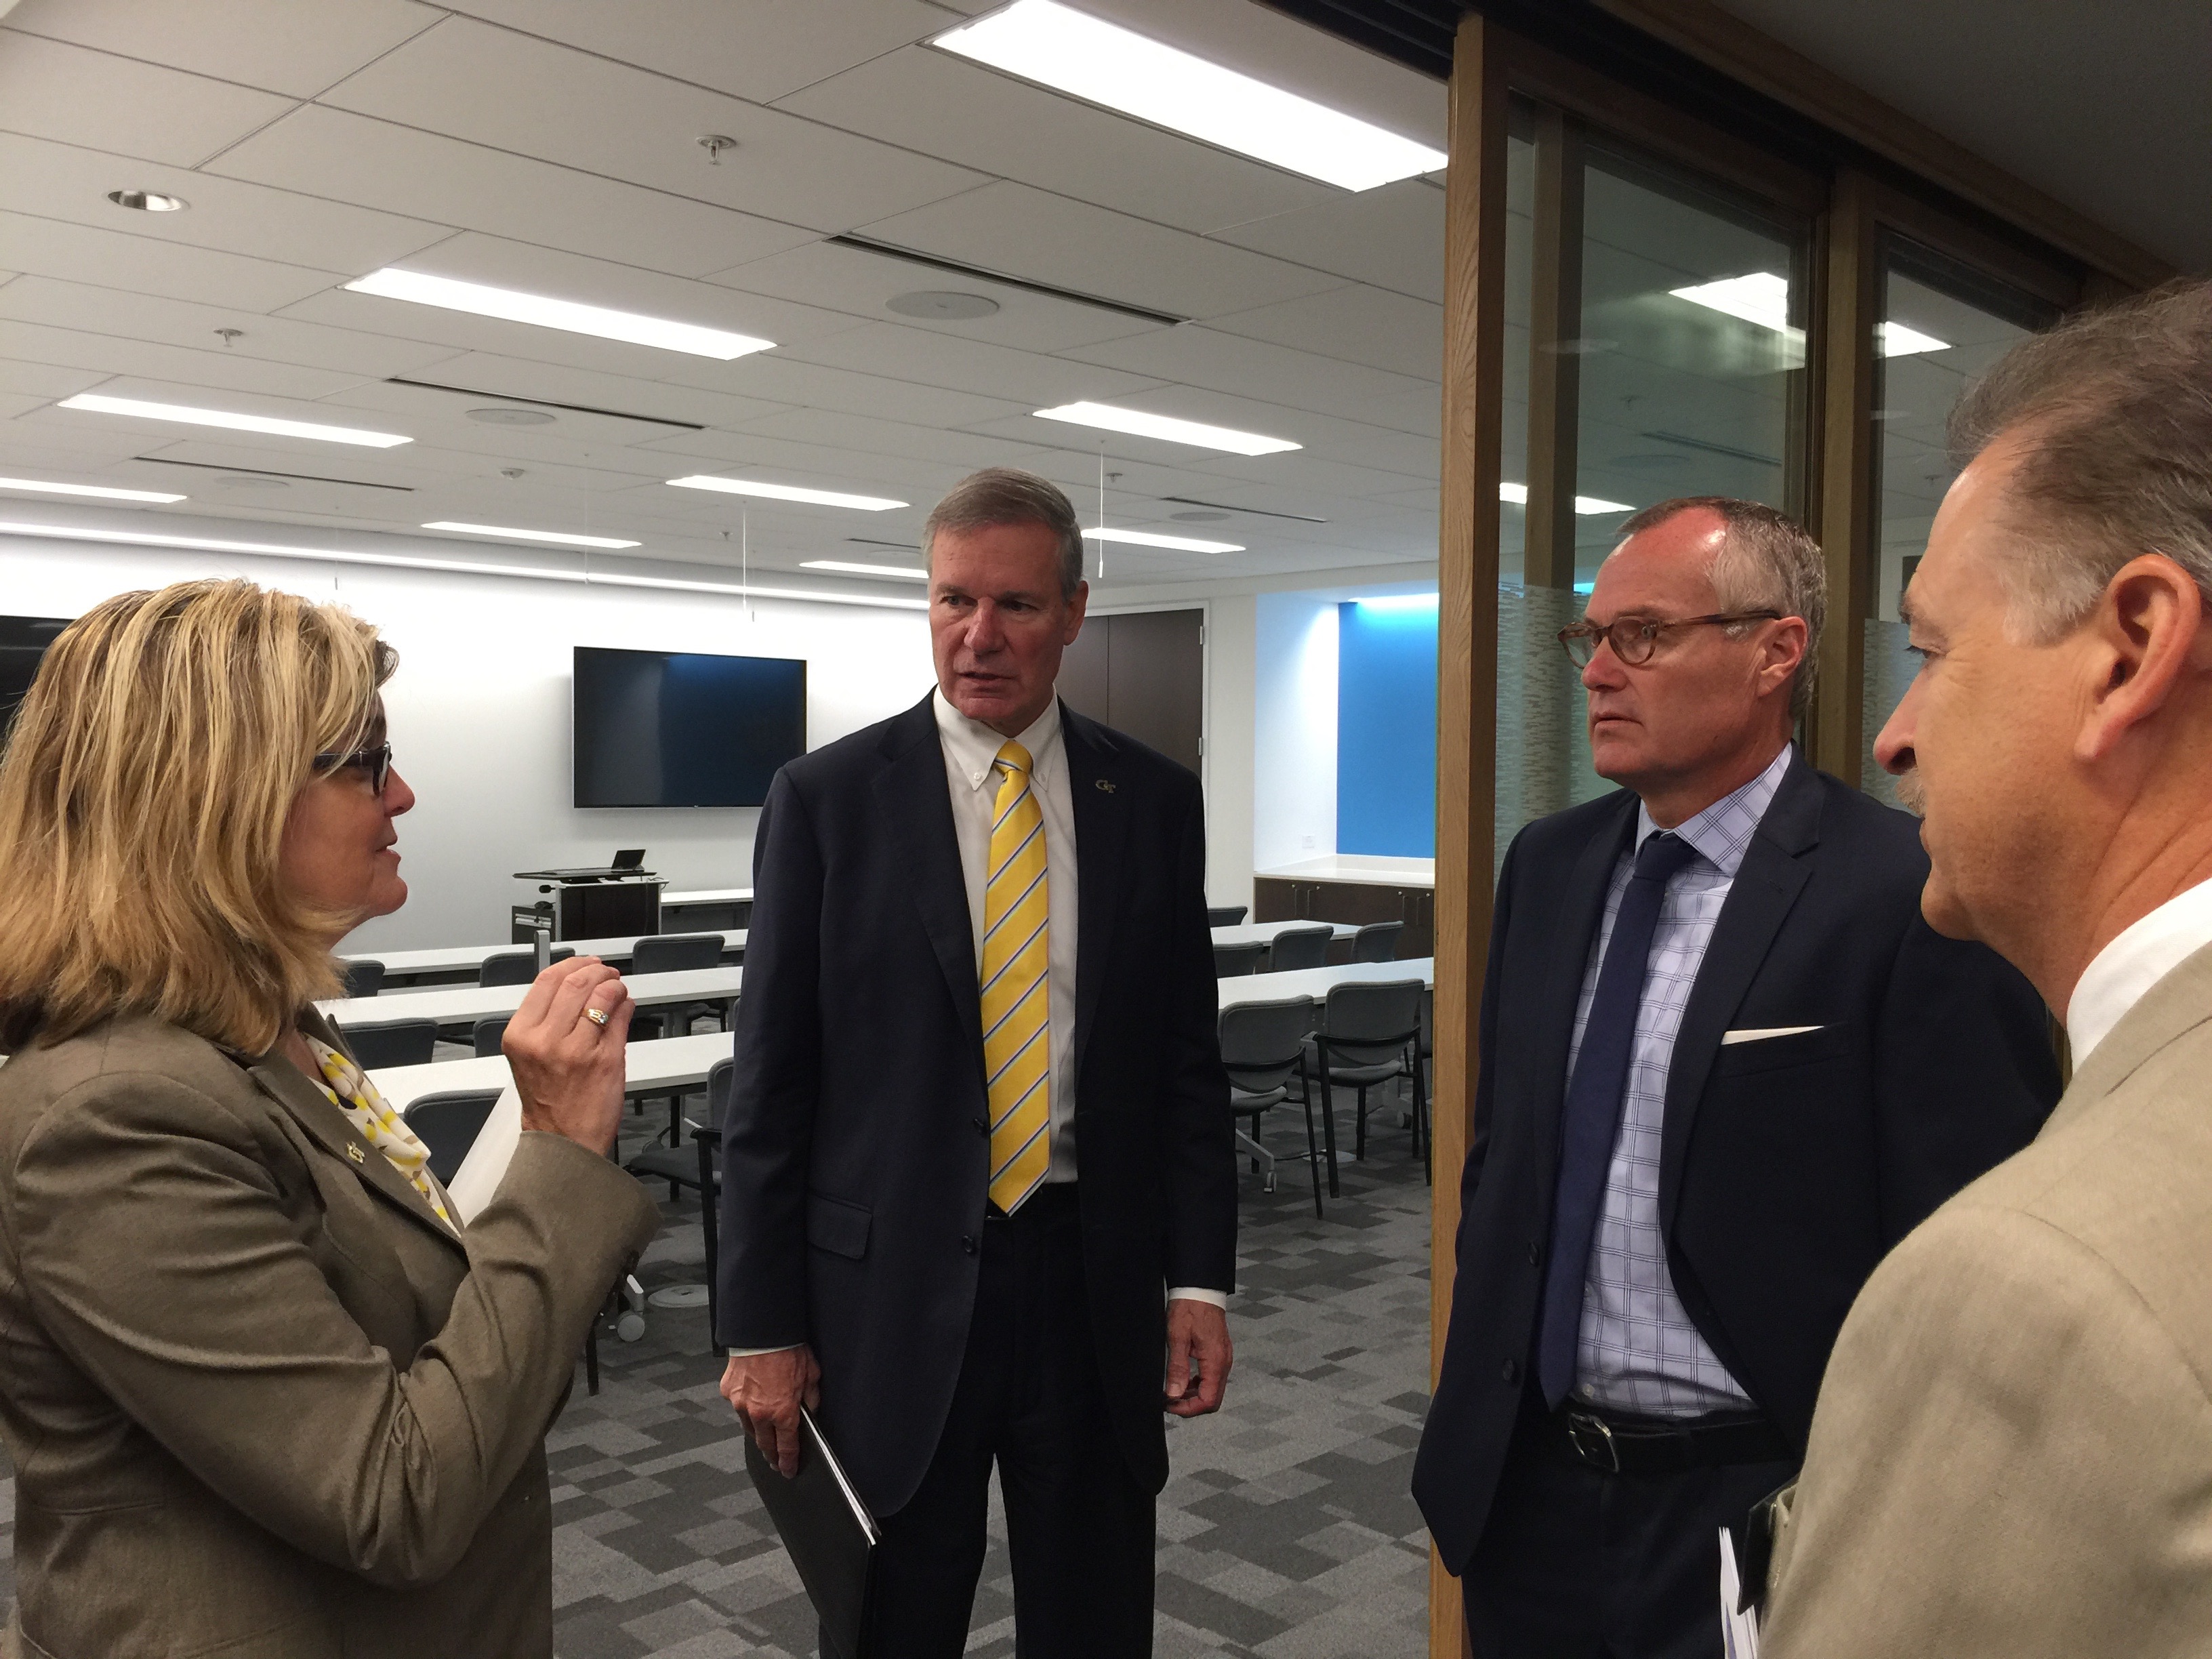 Jennifer Bonnett (left), general manager of Georgia Tech's Advanced Technology Development Center, explains how the incubator works with entrepreneurs across the state to Tech President G.P. "Bud" Peterson (center), Georgia Lt. Gov. Casey Cagle (right), and Chris Downing (near right), vice president of Tech's Enterprise Innovation Institute. Cagle visited the Tech campus Oct. 6 to learn more about the Institiute's innovation ecosystem. (Photo credit: Péralte C. Paul)